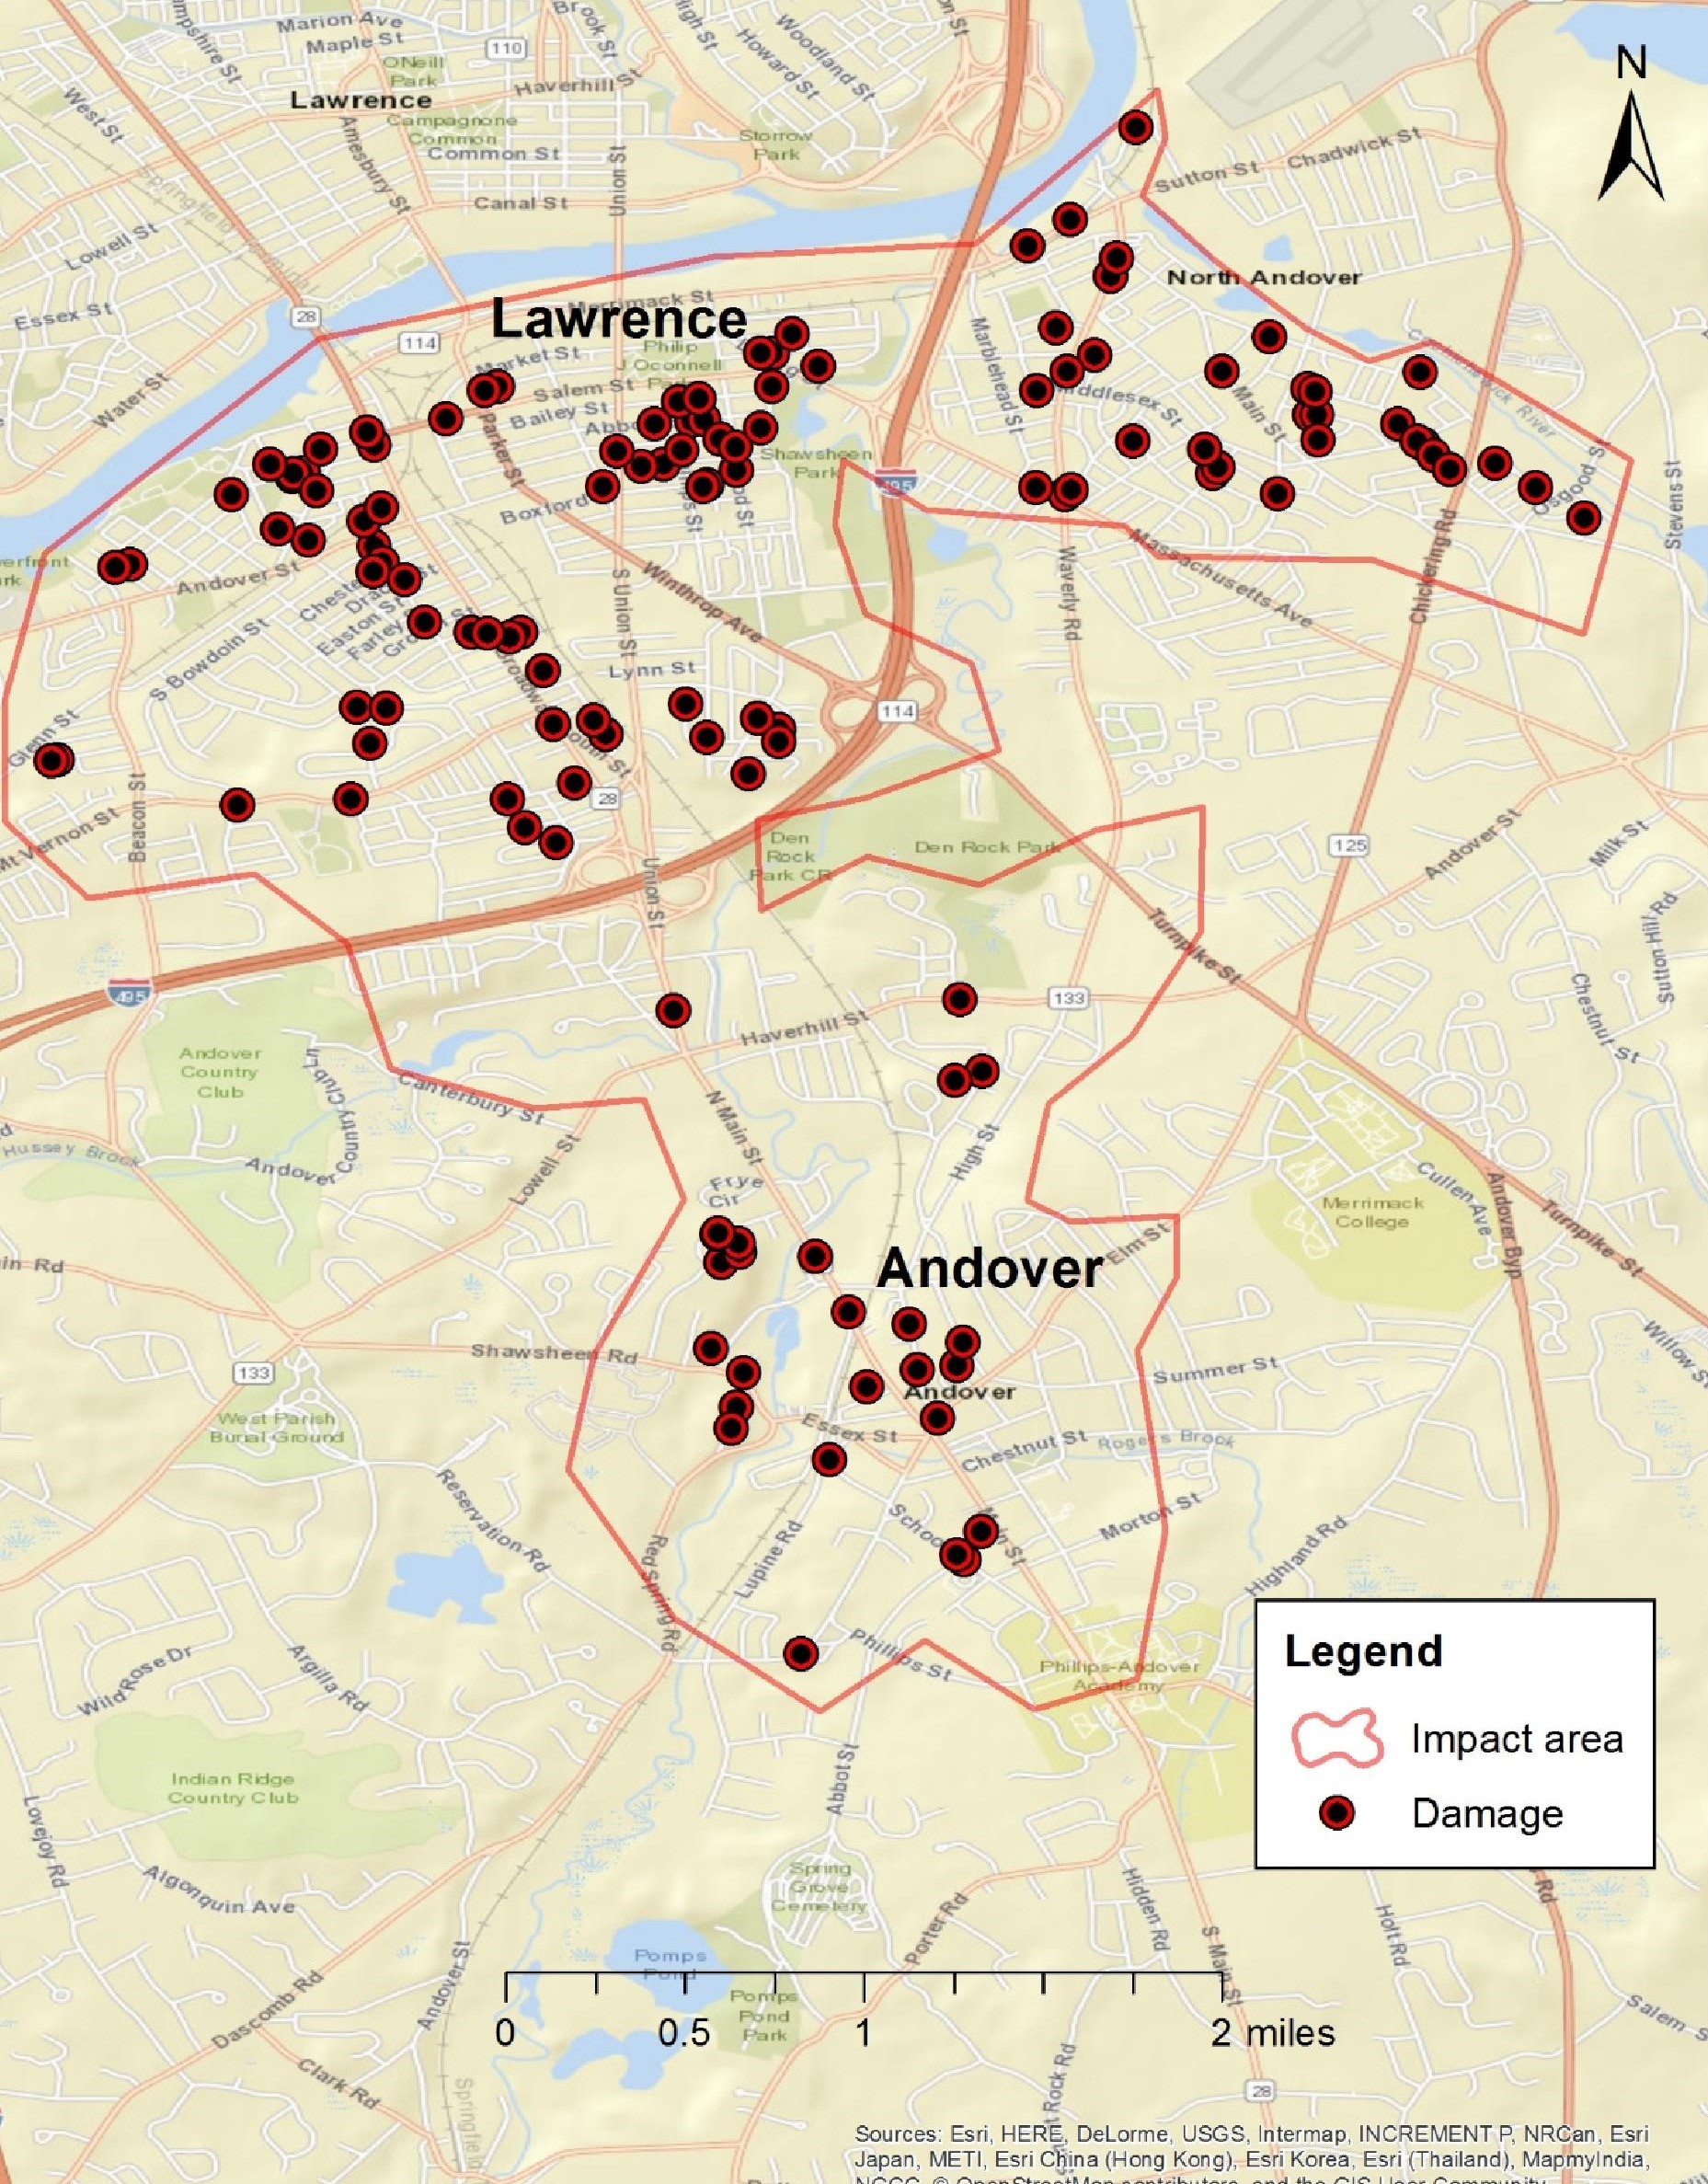 NTSB map of damage in Merrimack Valley explosion